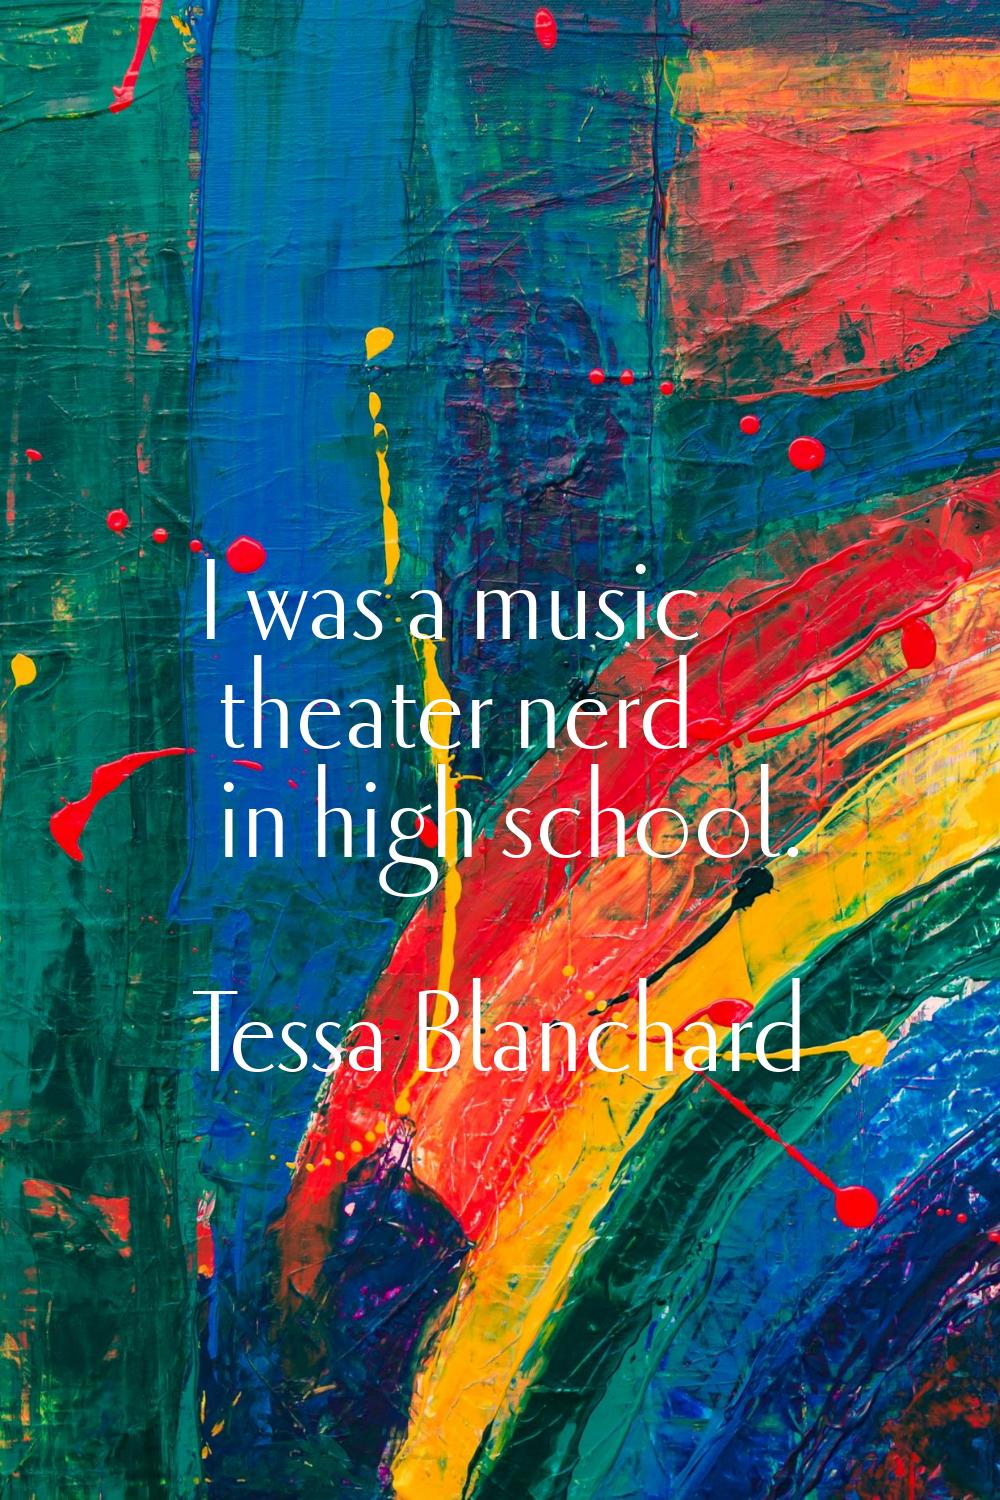 I was a music theater nerd in high school.